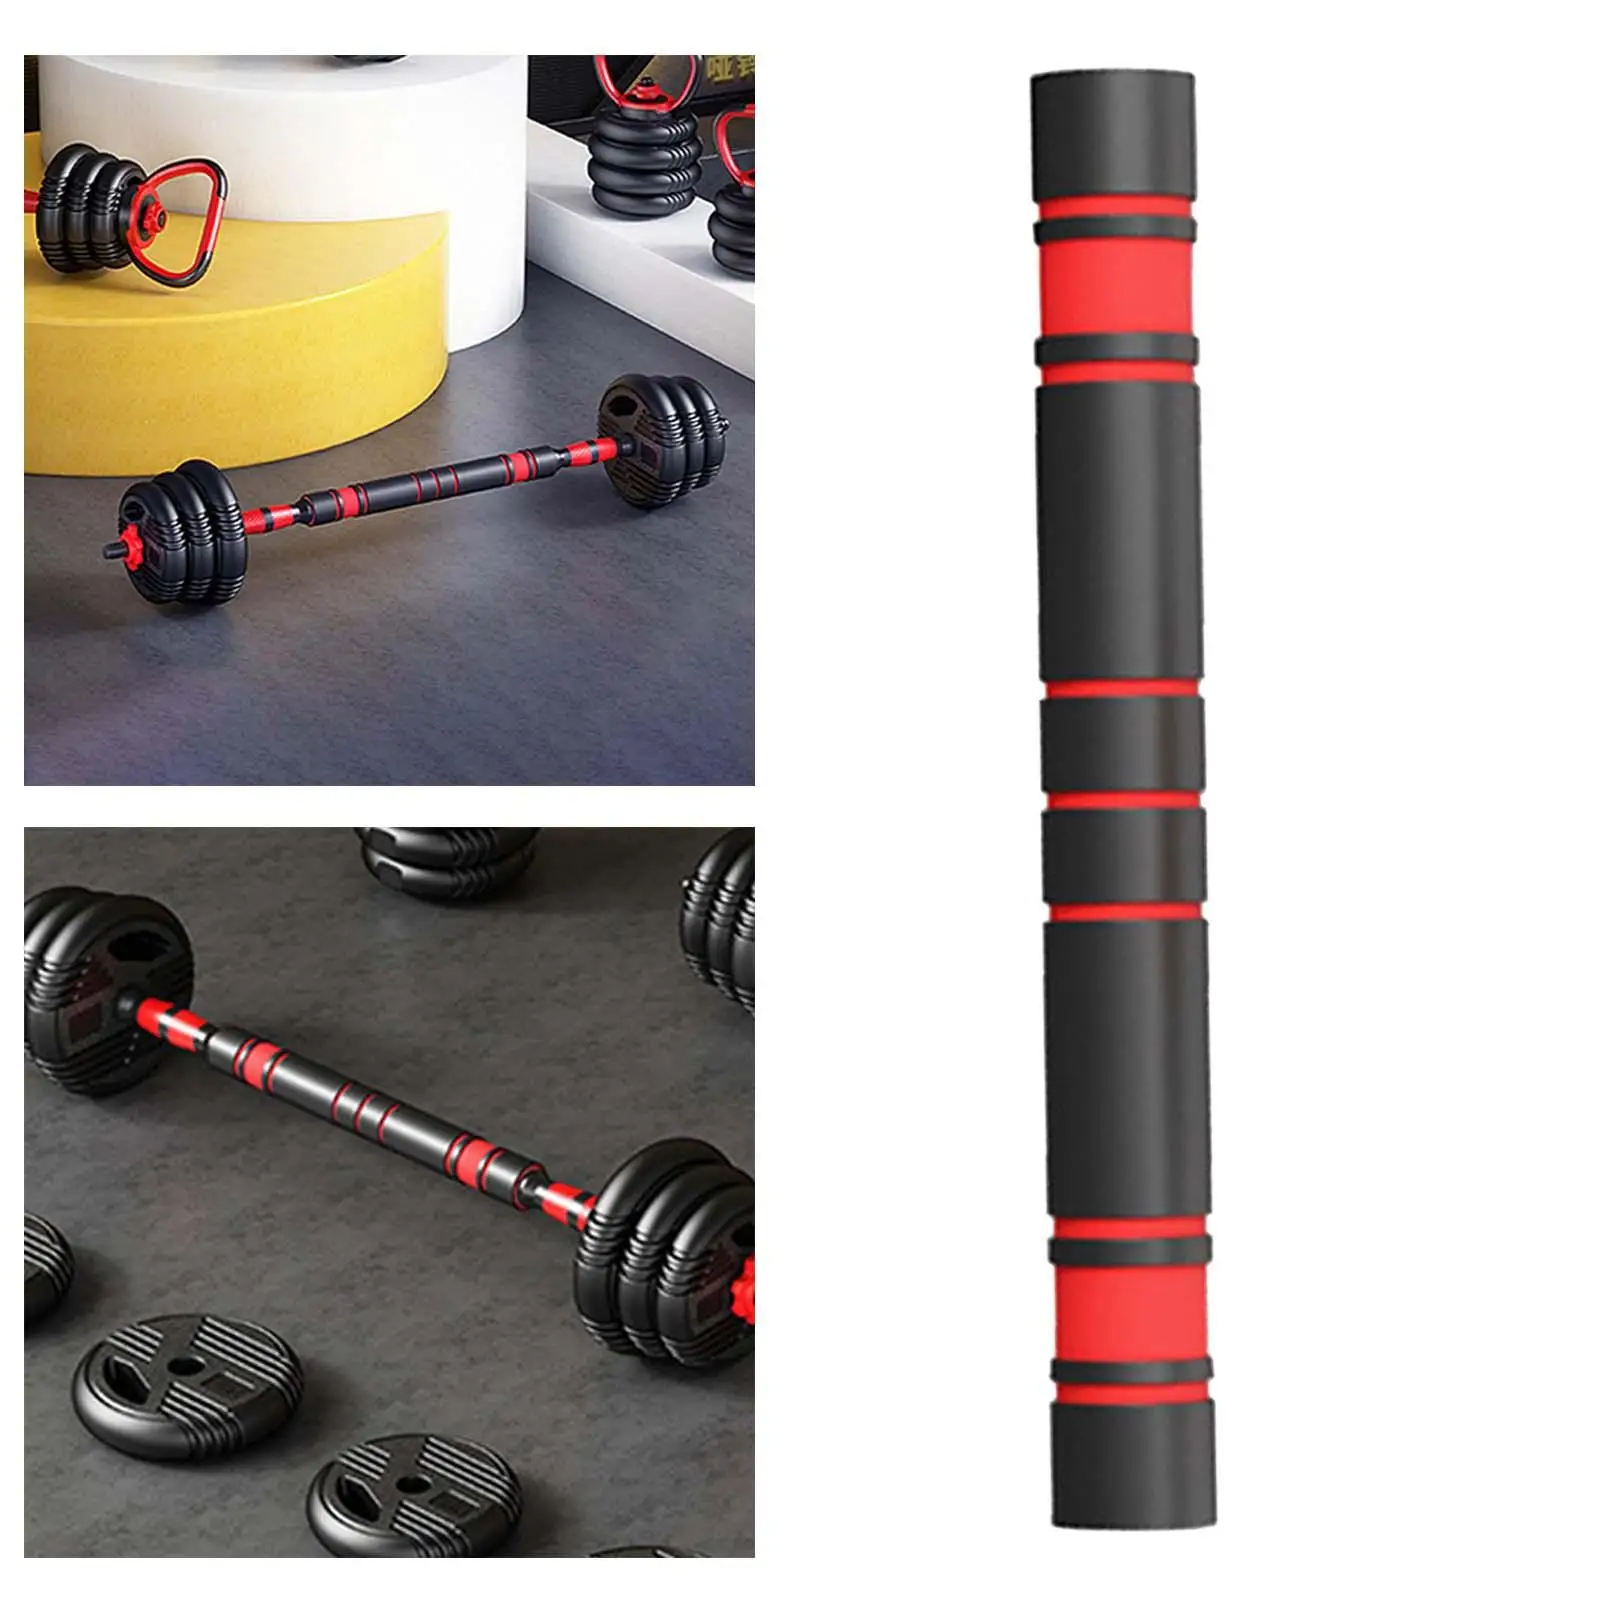 Dumbbell Handle Weightlifting Accessories Durable Adapter Men Women Strength Dumbbell Extension Bar for Training Sport Gym